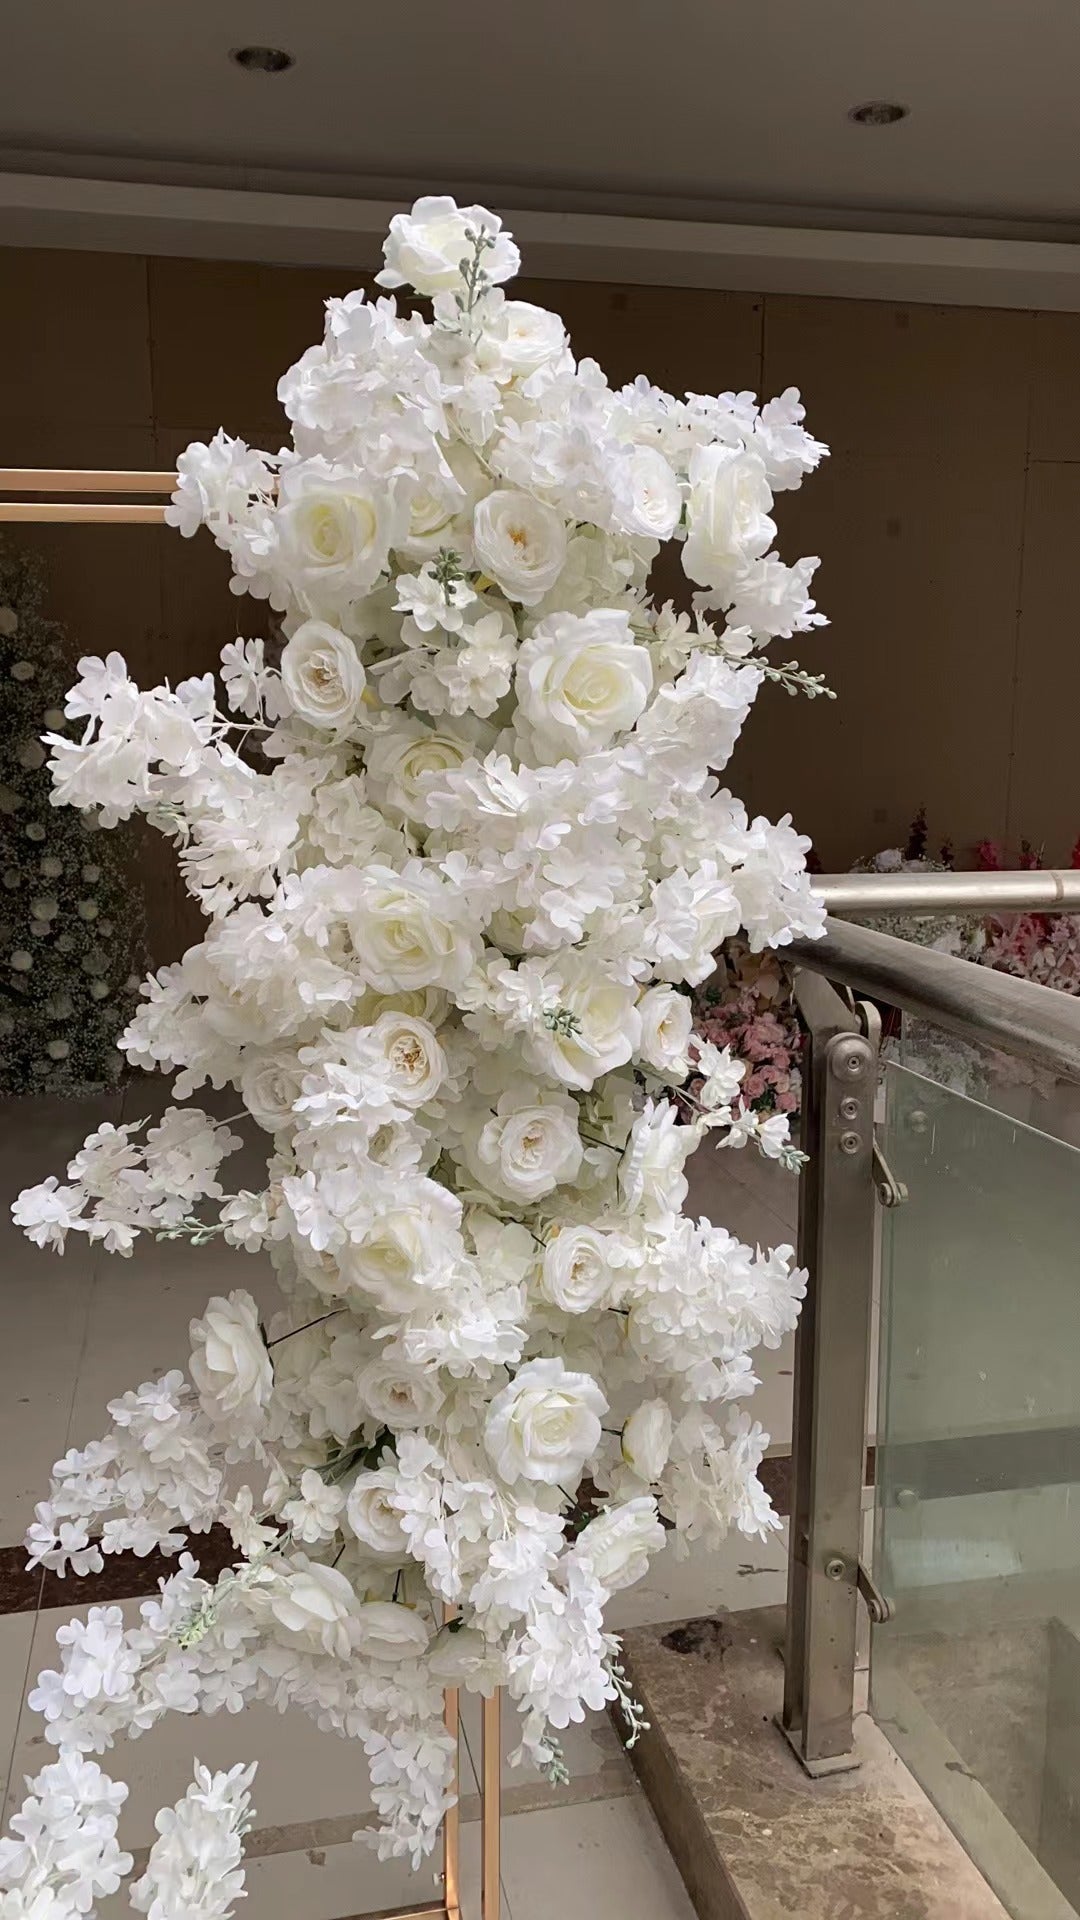 New Simulated Cherry Blossom Flower Ball Shopping Mall Exhibition Hall Window Decoration Flower Wedding Background Stage Table Arrangement Flower Art